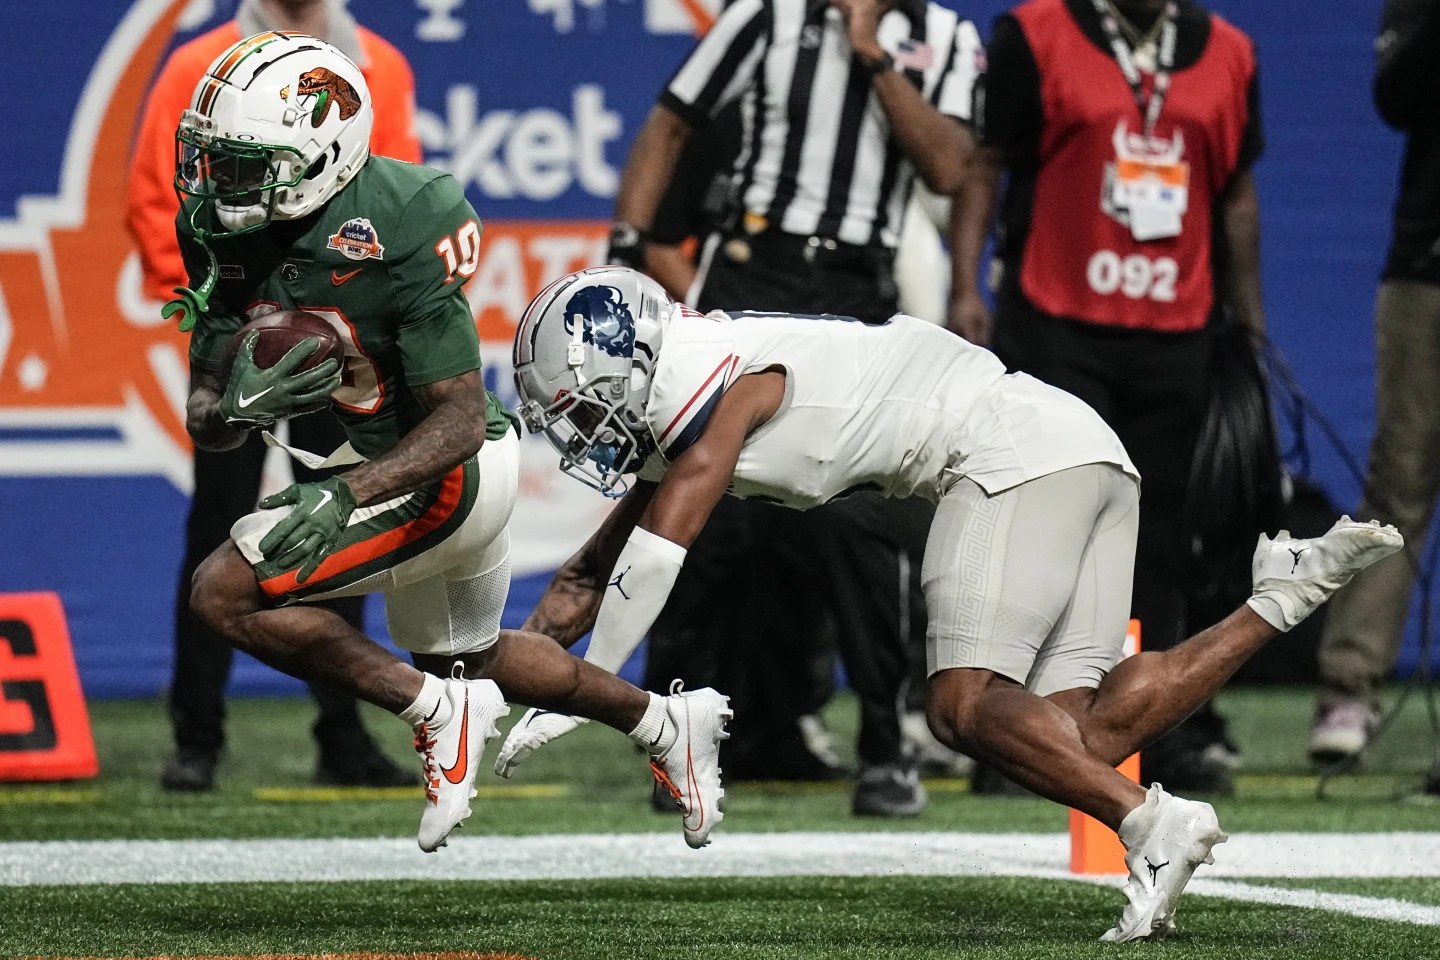 Florida A&M beats Howard 30-26 in come-back fashion at Celebration Bowl